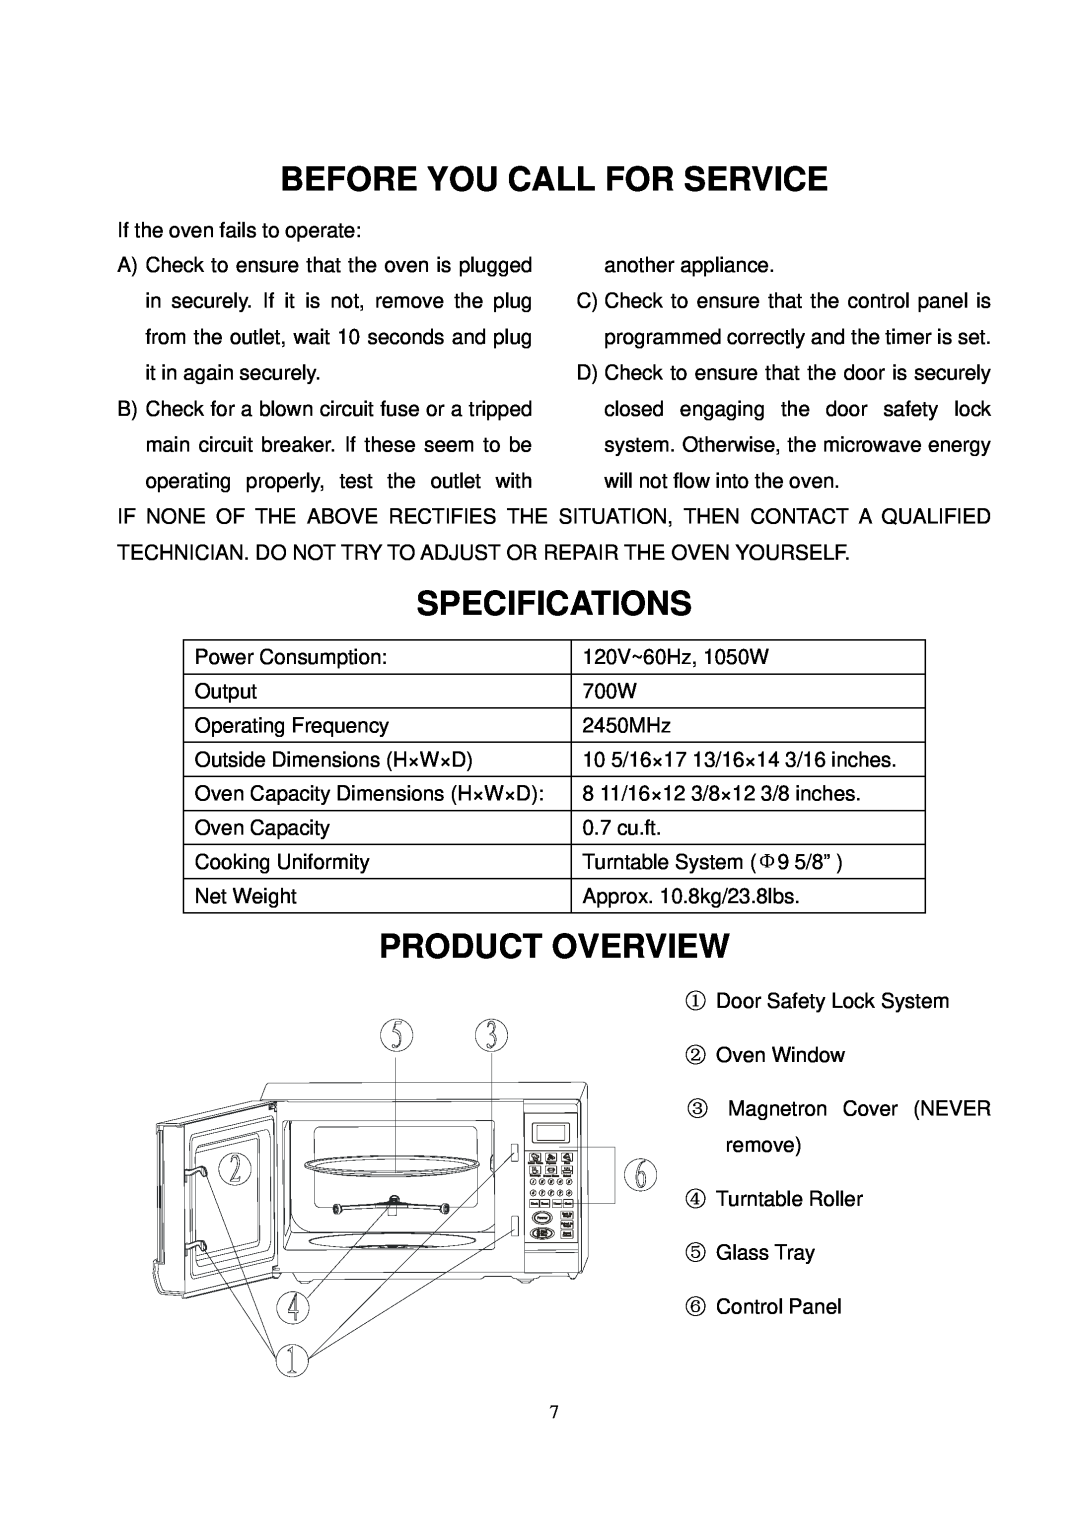 Magnasonic MMW5736-1, MMW5736-4 instruction manual Before You Call For Service, Specifications, Product Overview 